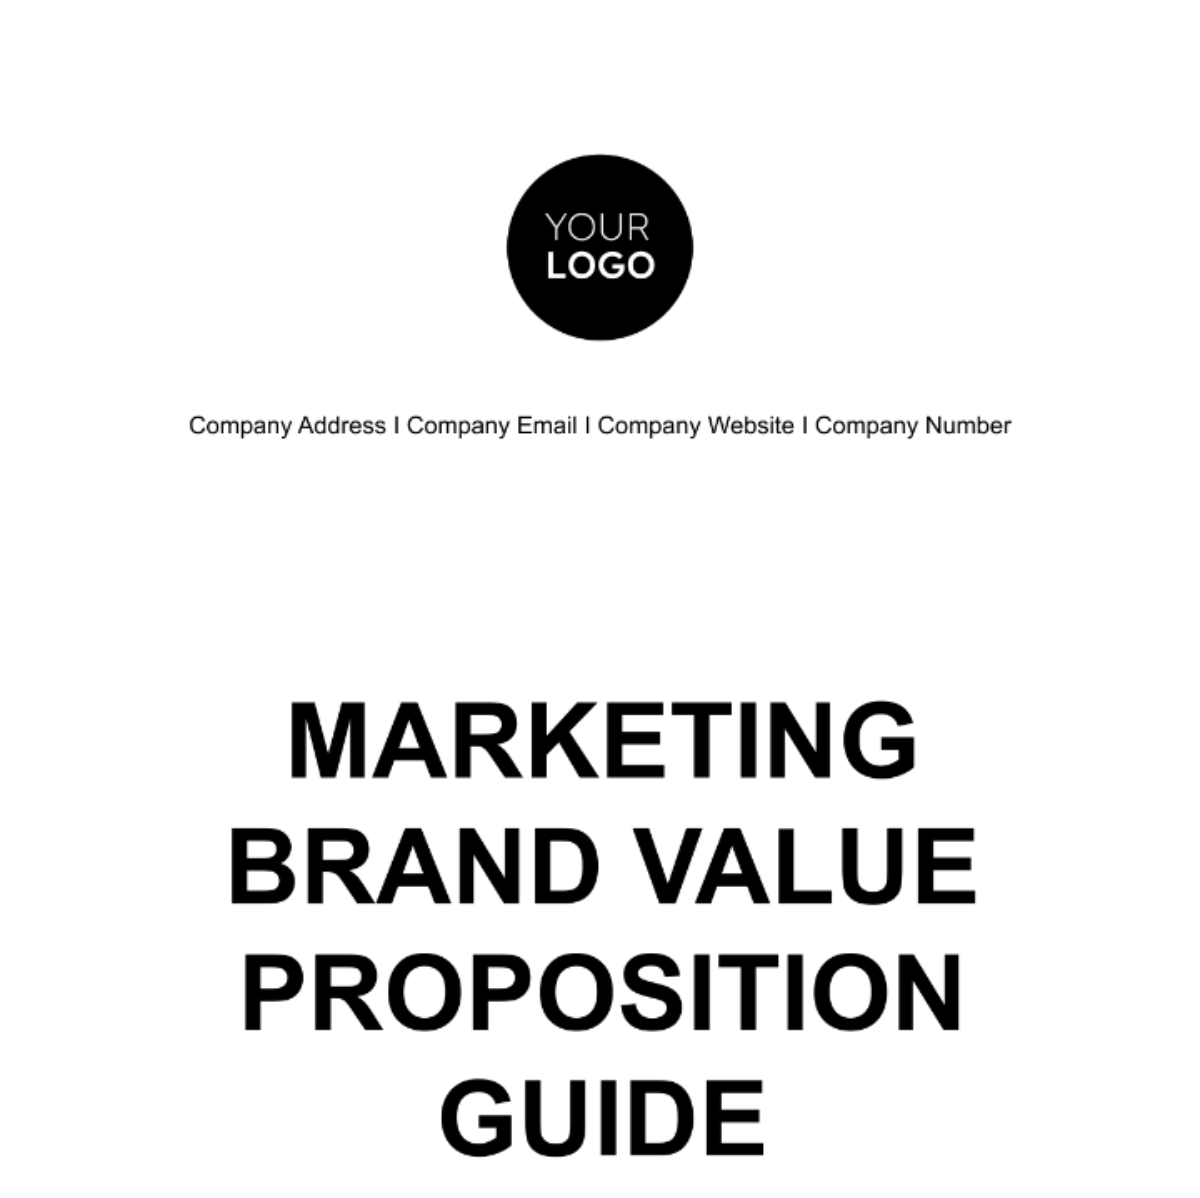 Marketing Brand Value Proposition Guide Template